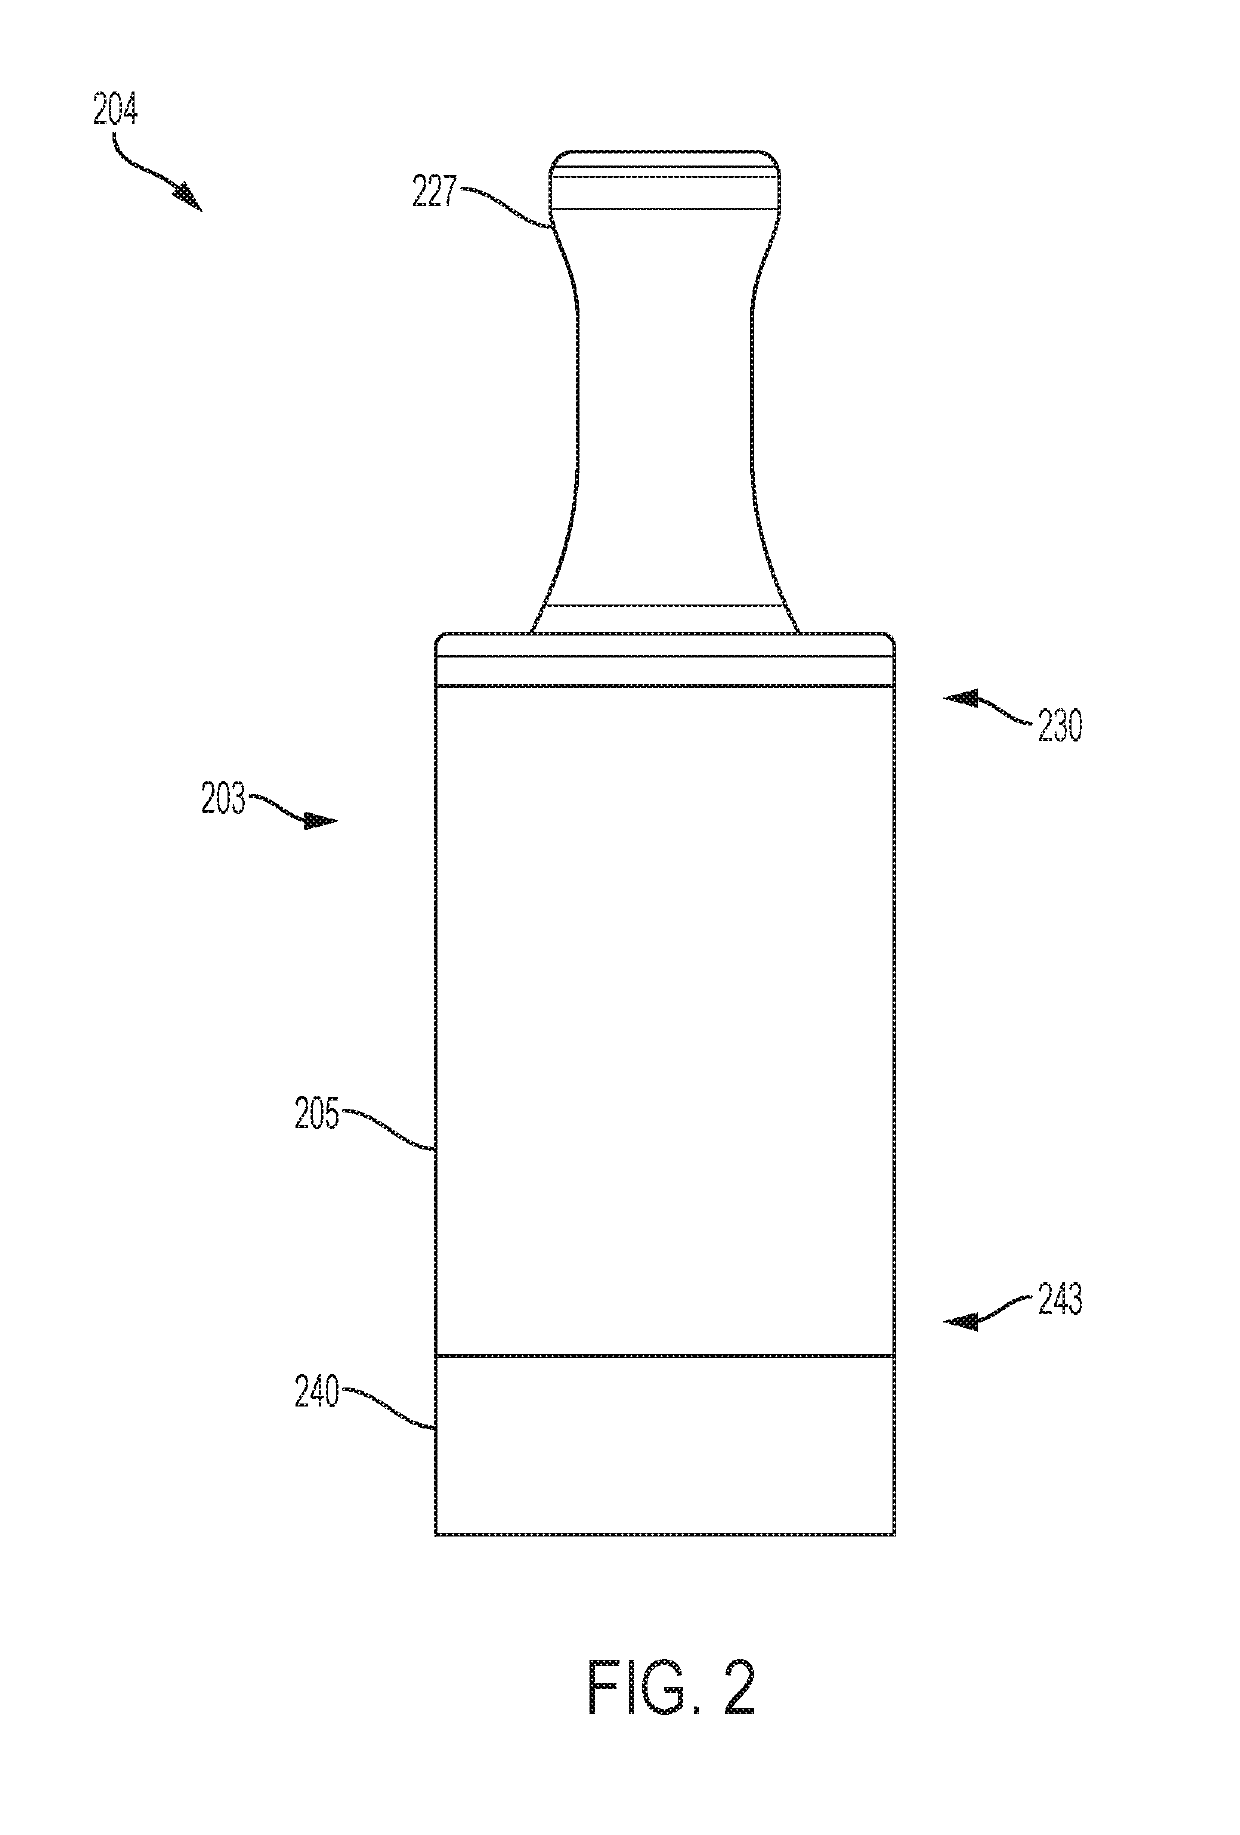 Aerosol delivery device including a ceramic wicking element